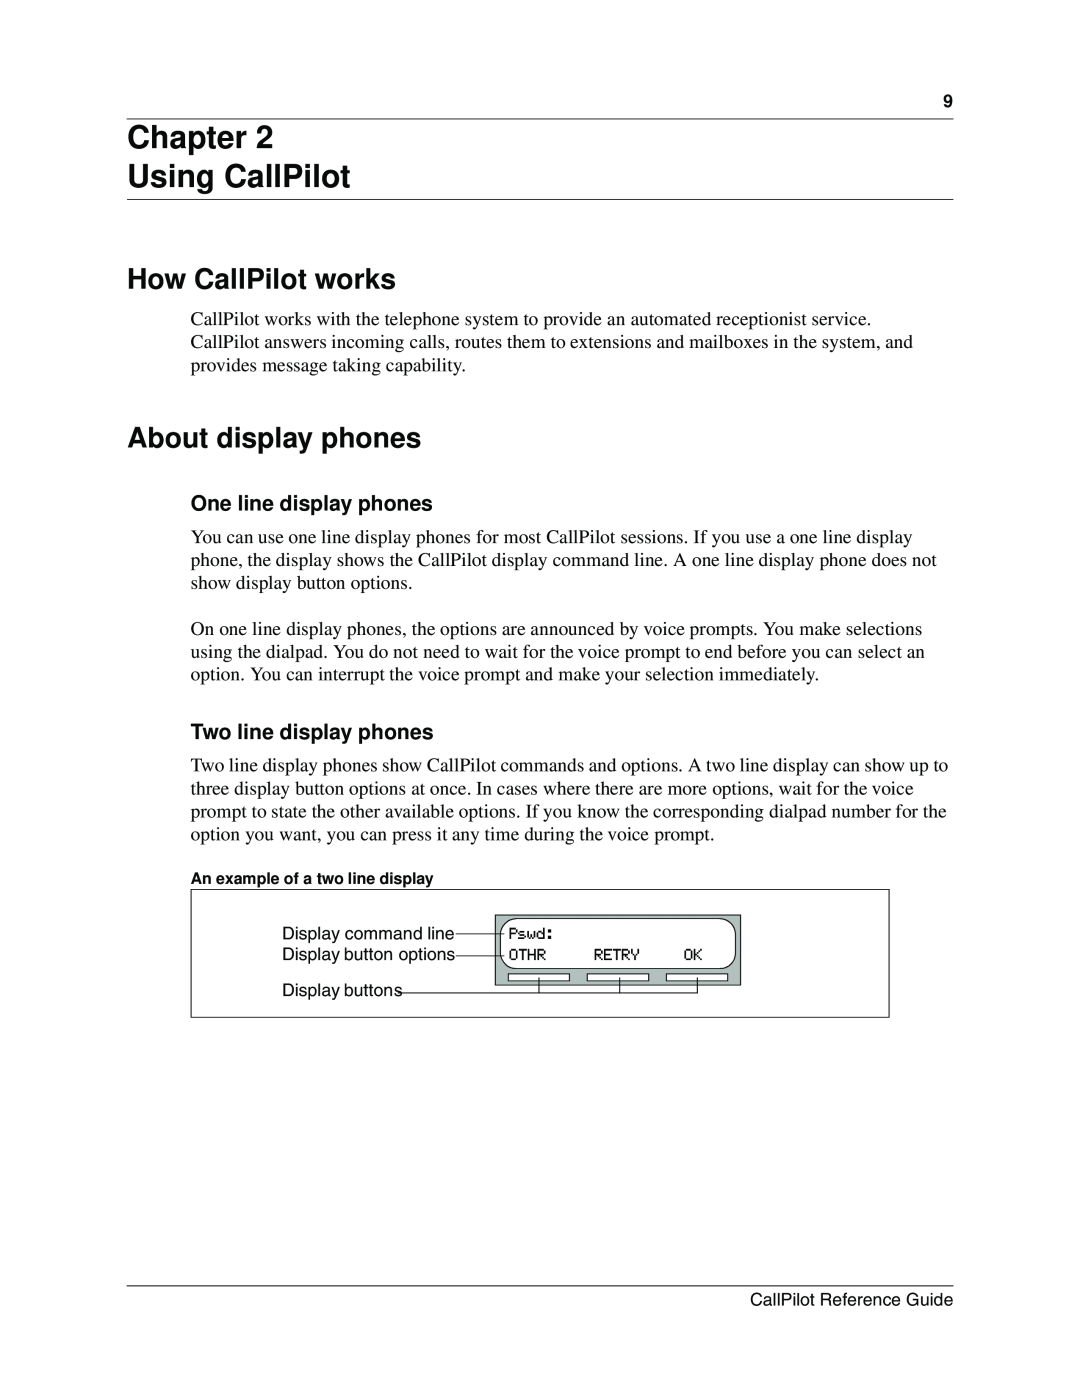 Nortel Networks manual Chapter Using CallPilot, How CallPilot works, About display phones, One line display phones 